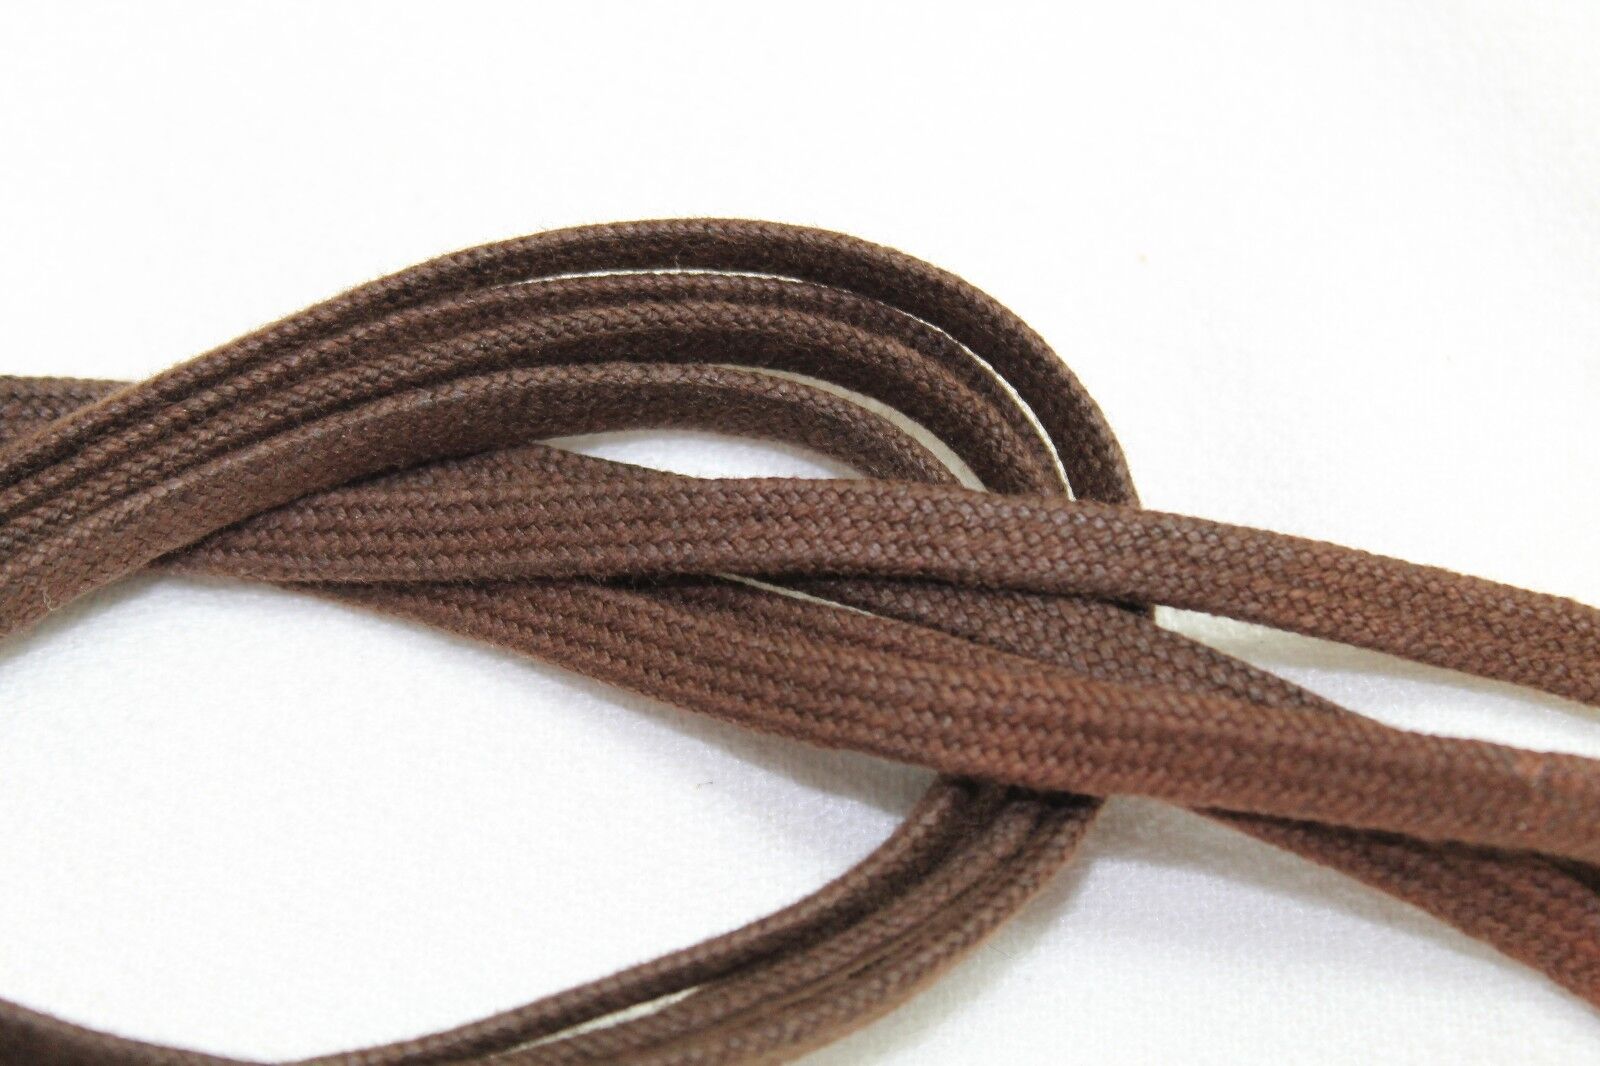 WWII US brown waxed shoelaces boot laces shoe strings 38 inches 96.5cm pair E923 Без бренда - фотография #5